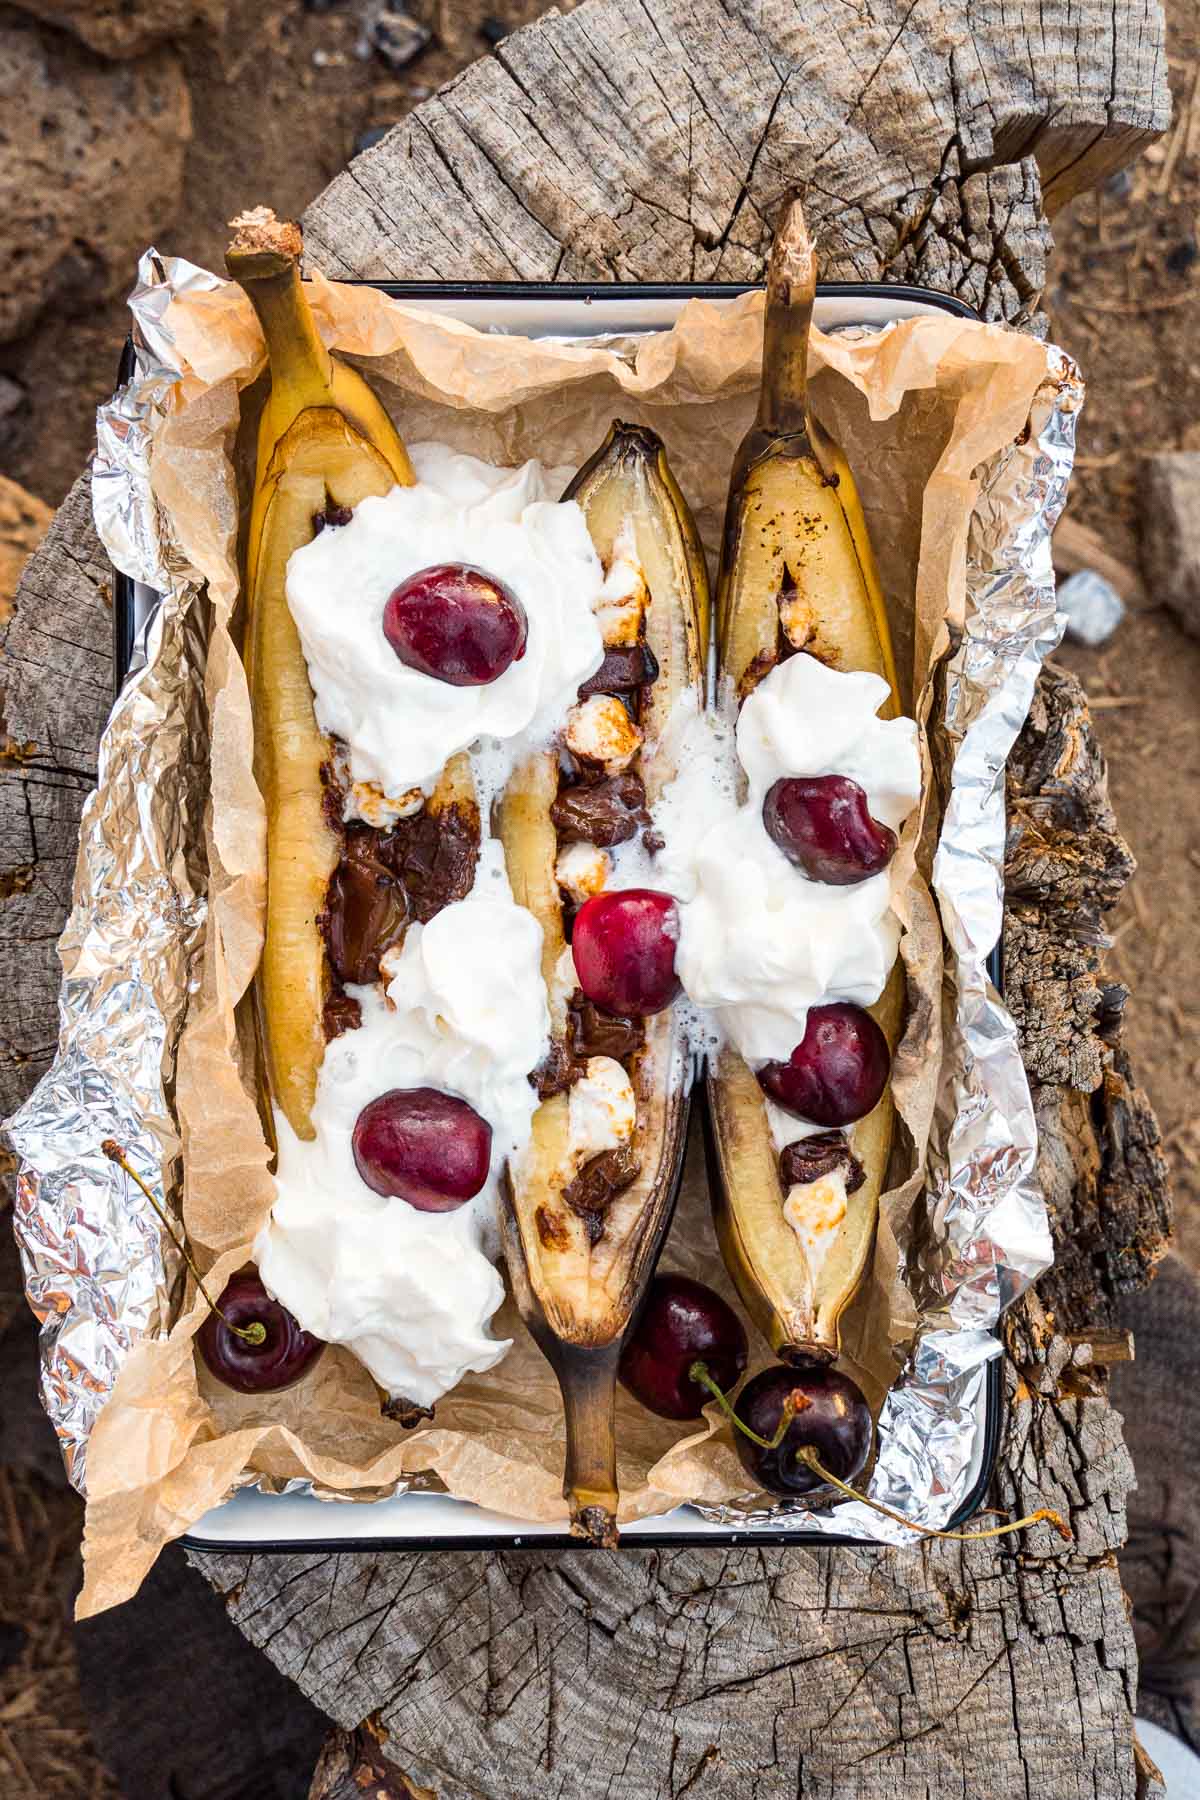 Campfire banana splits topped with whipped cream in a serving dish on a log